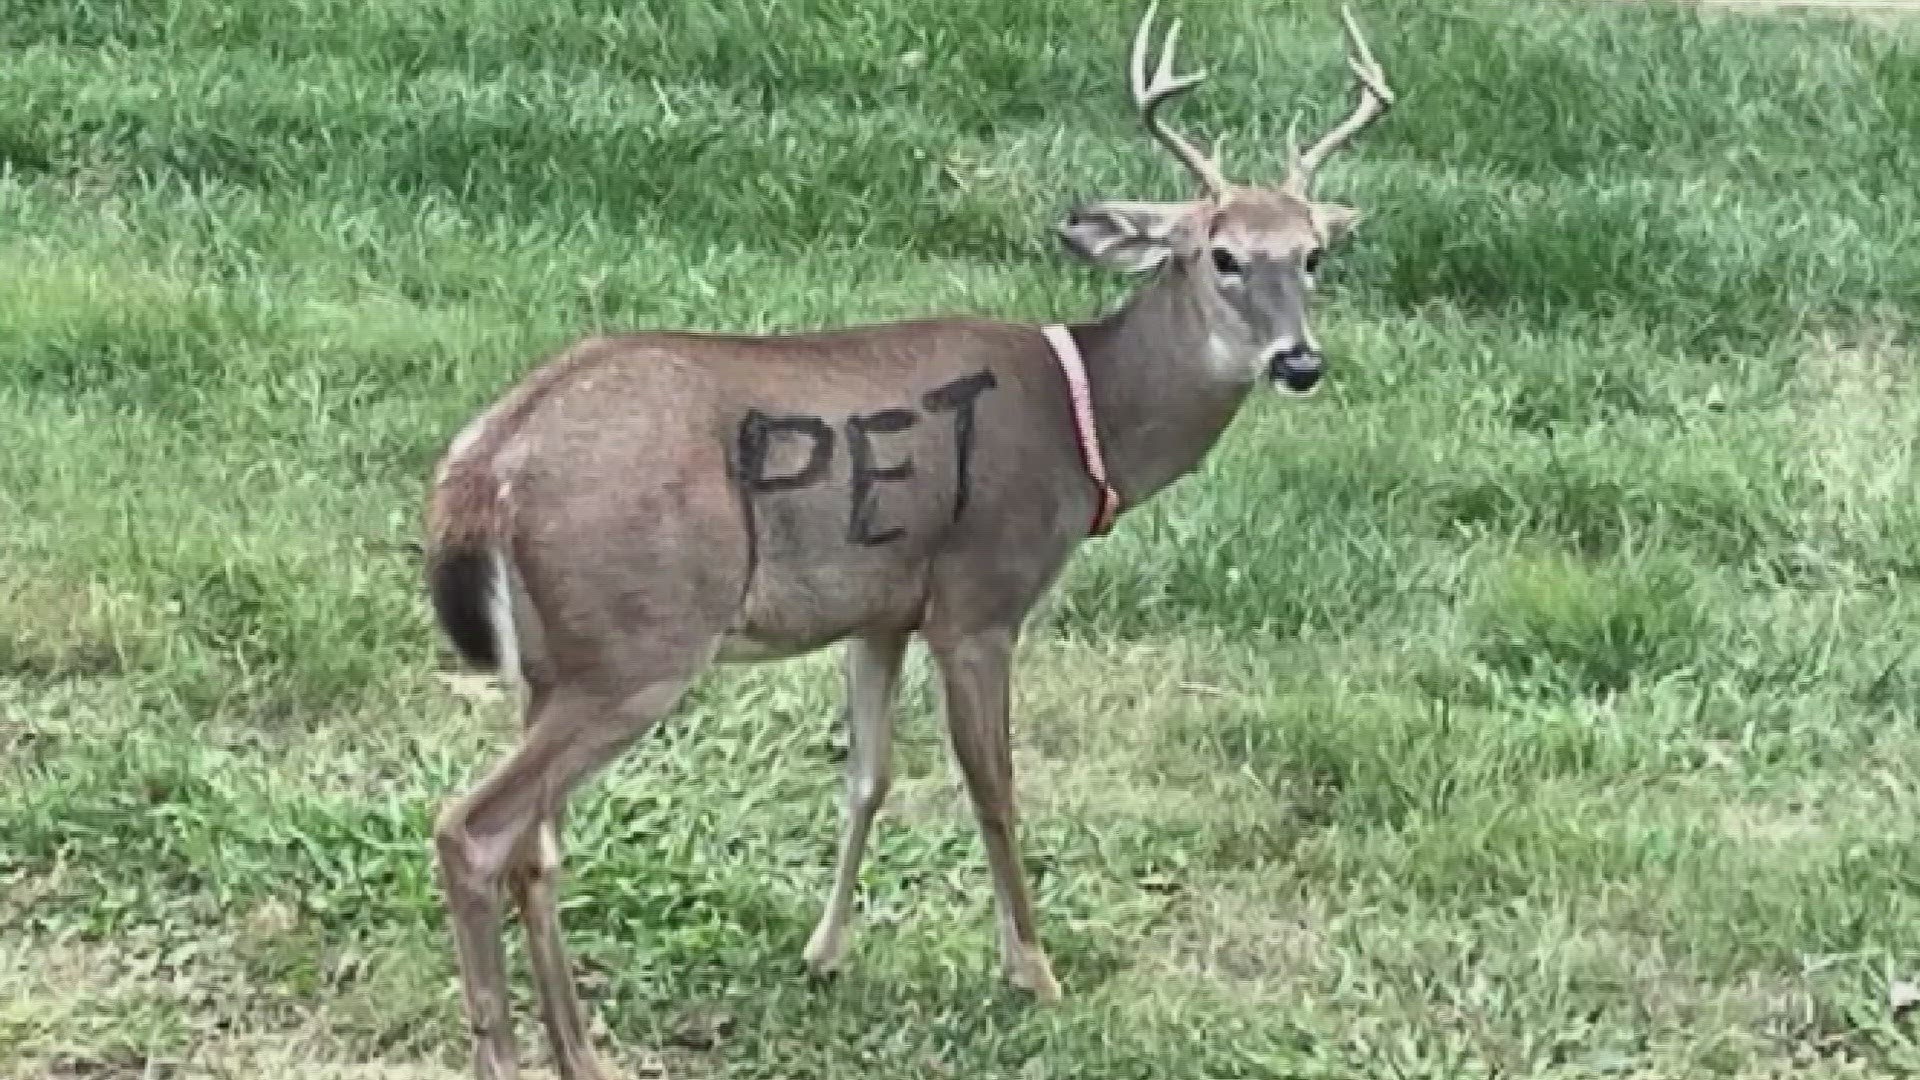 Deer are wild animals, not pets, as the Jefferson County Sheriff's Office and the Missouri Department of Conservation reminded residents. Deer are wild animals.